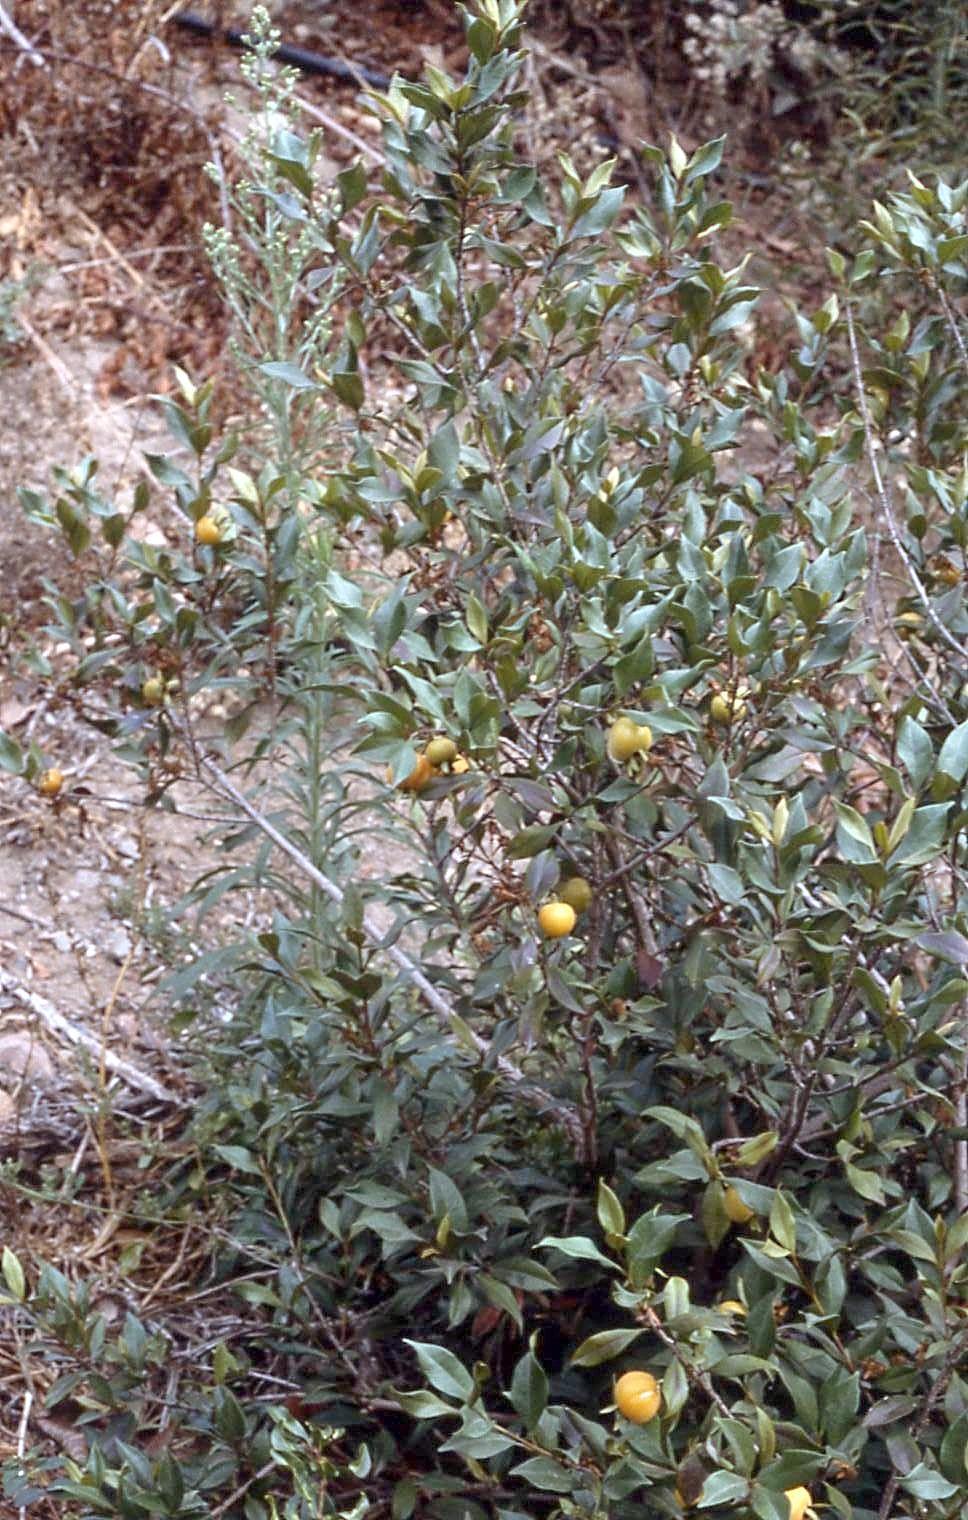 Eugenia luschnathiana Pitomba First introduced into the U. S. in 1914.